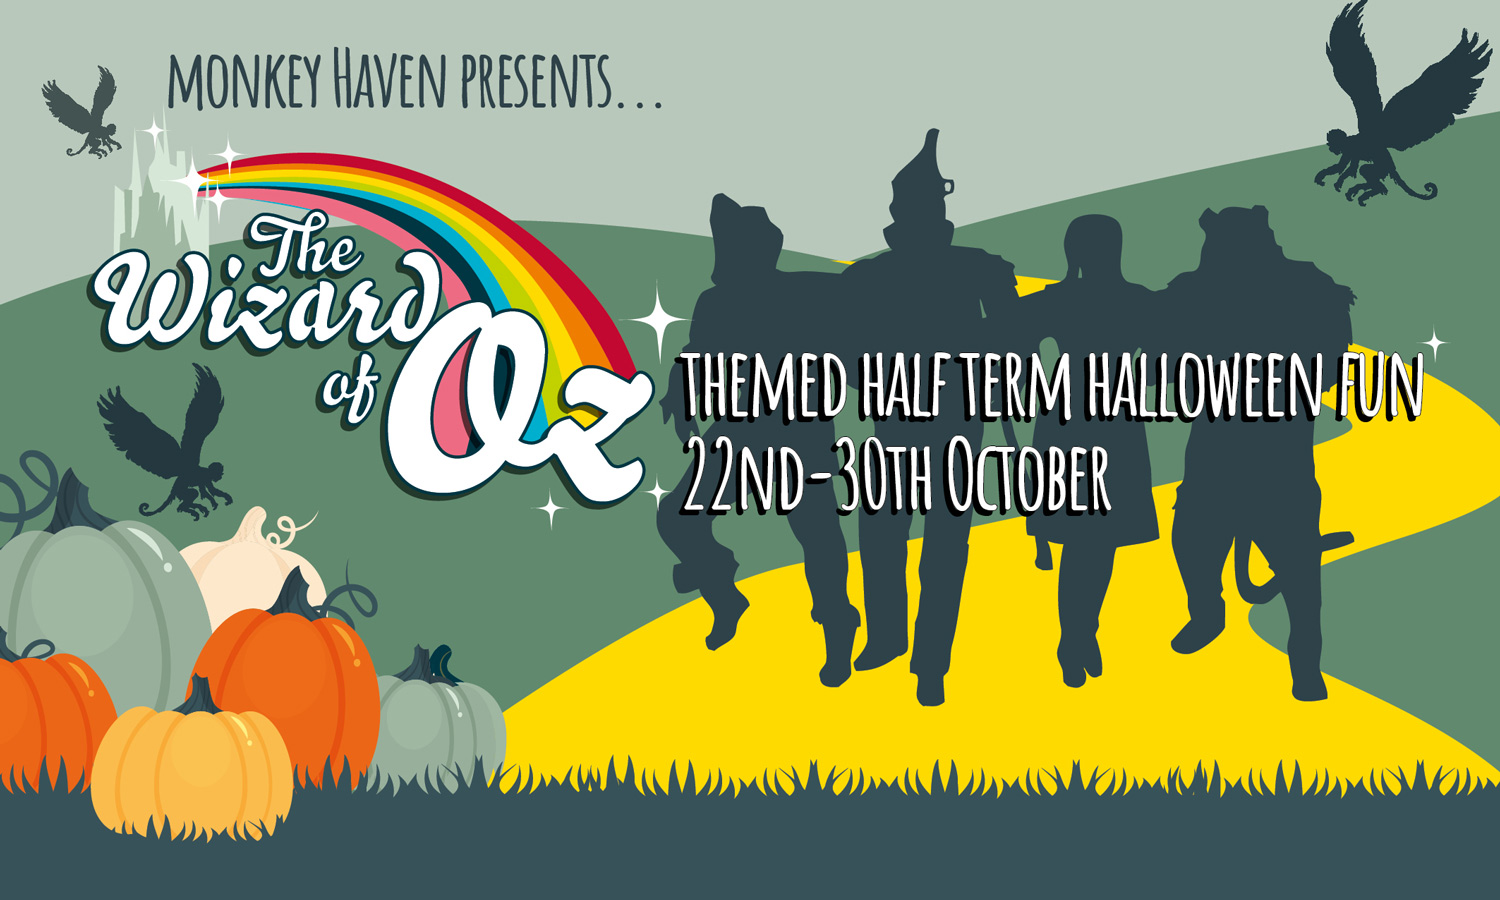 Wizard of Oz themed October half term fun at Monkey Haven